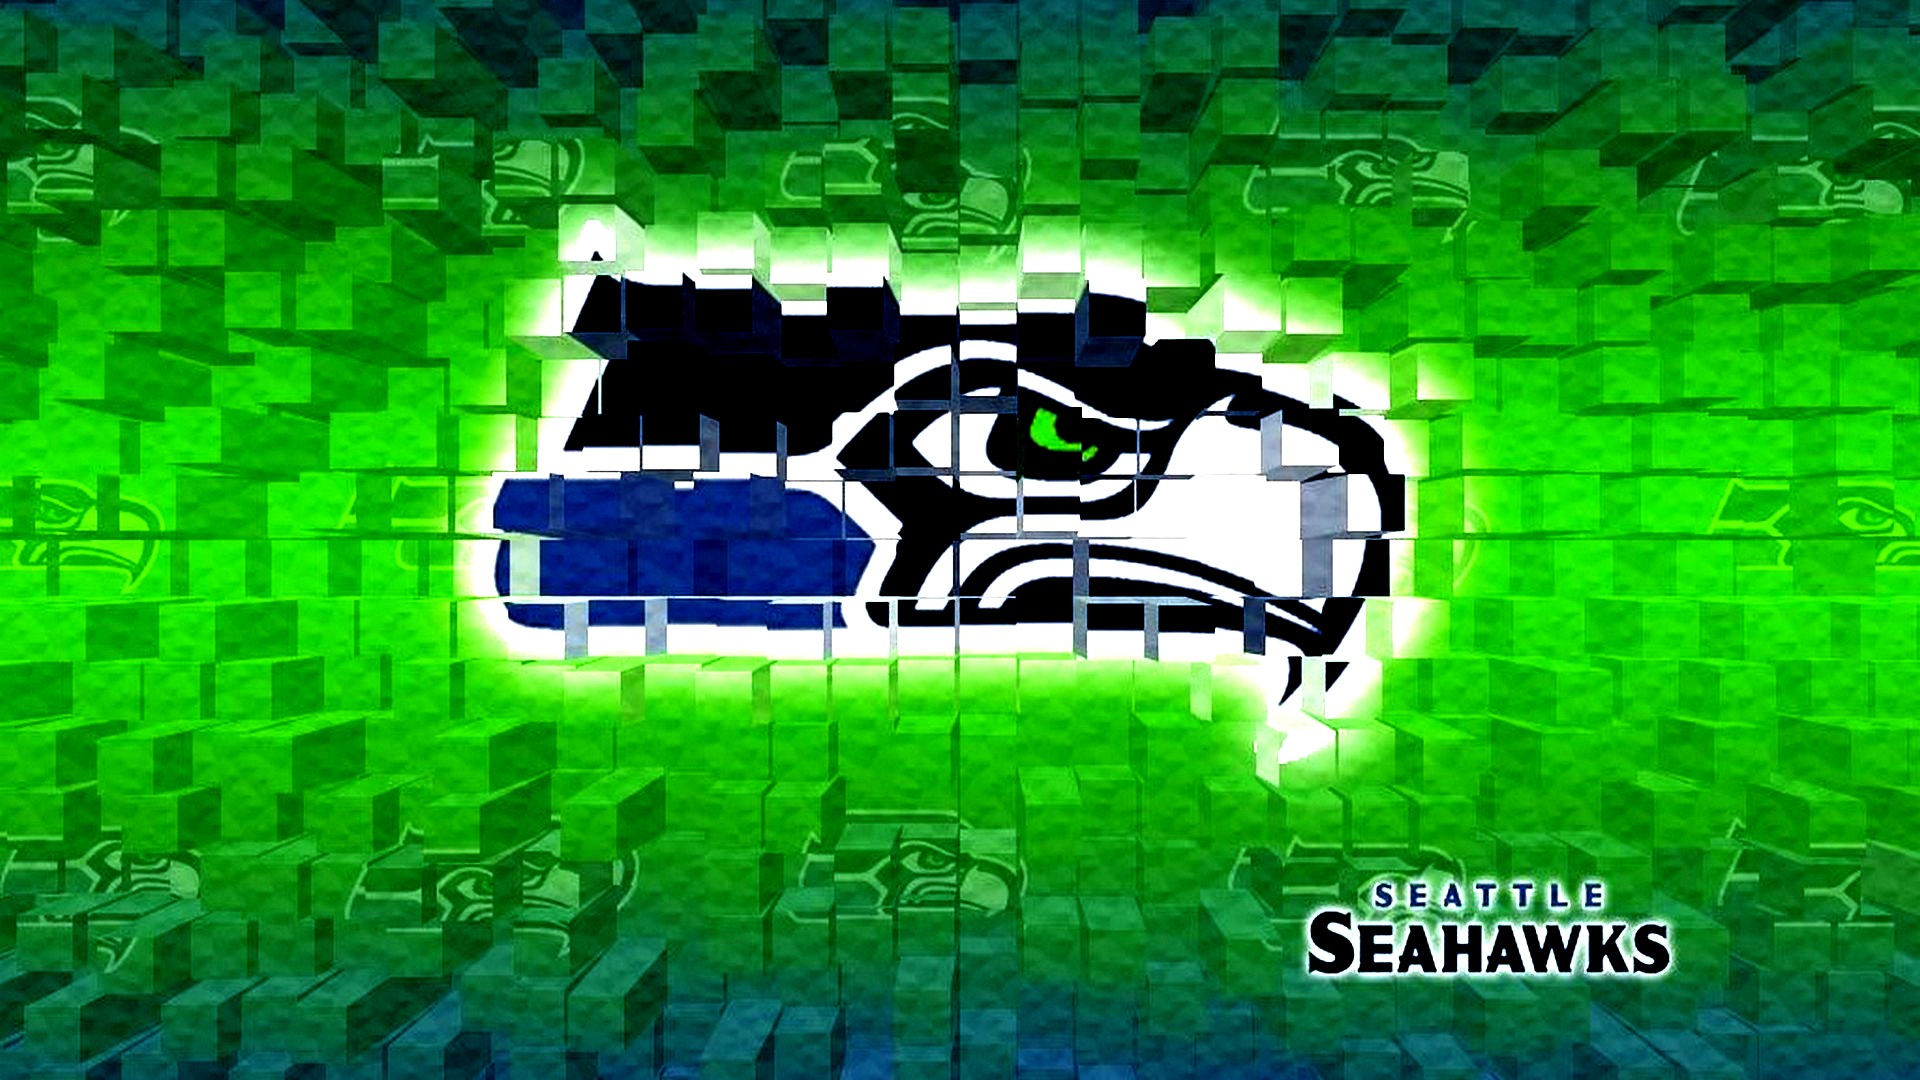 Seattle Seahawks Laptop Wallpaper With high-resolution 1920X1080 pixel. Download and set as wallpaper for Desktop Computer, Apple iPhone X, XS Max, XR, 8, 7, 6, SE, iPad, Android